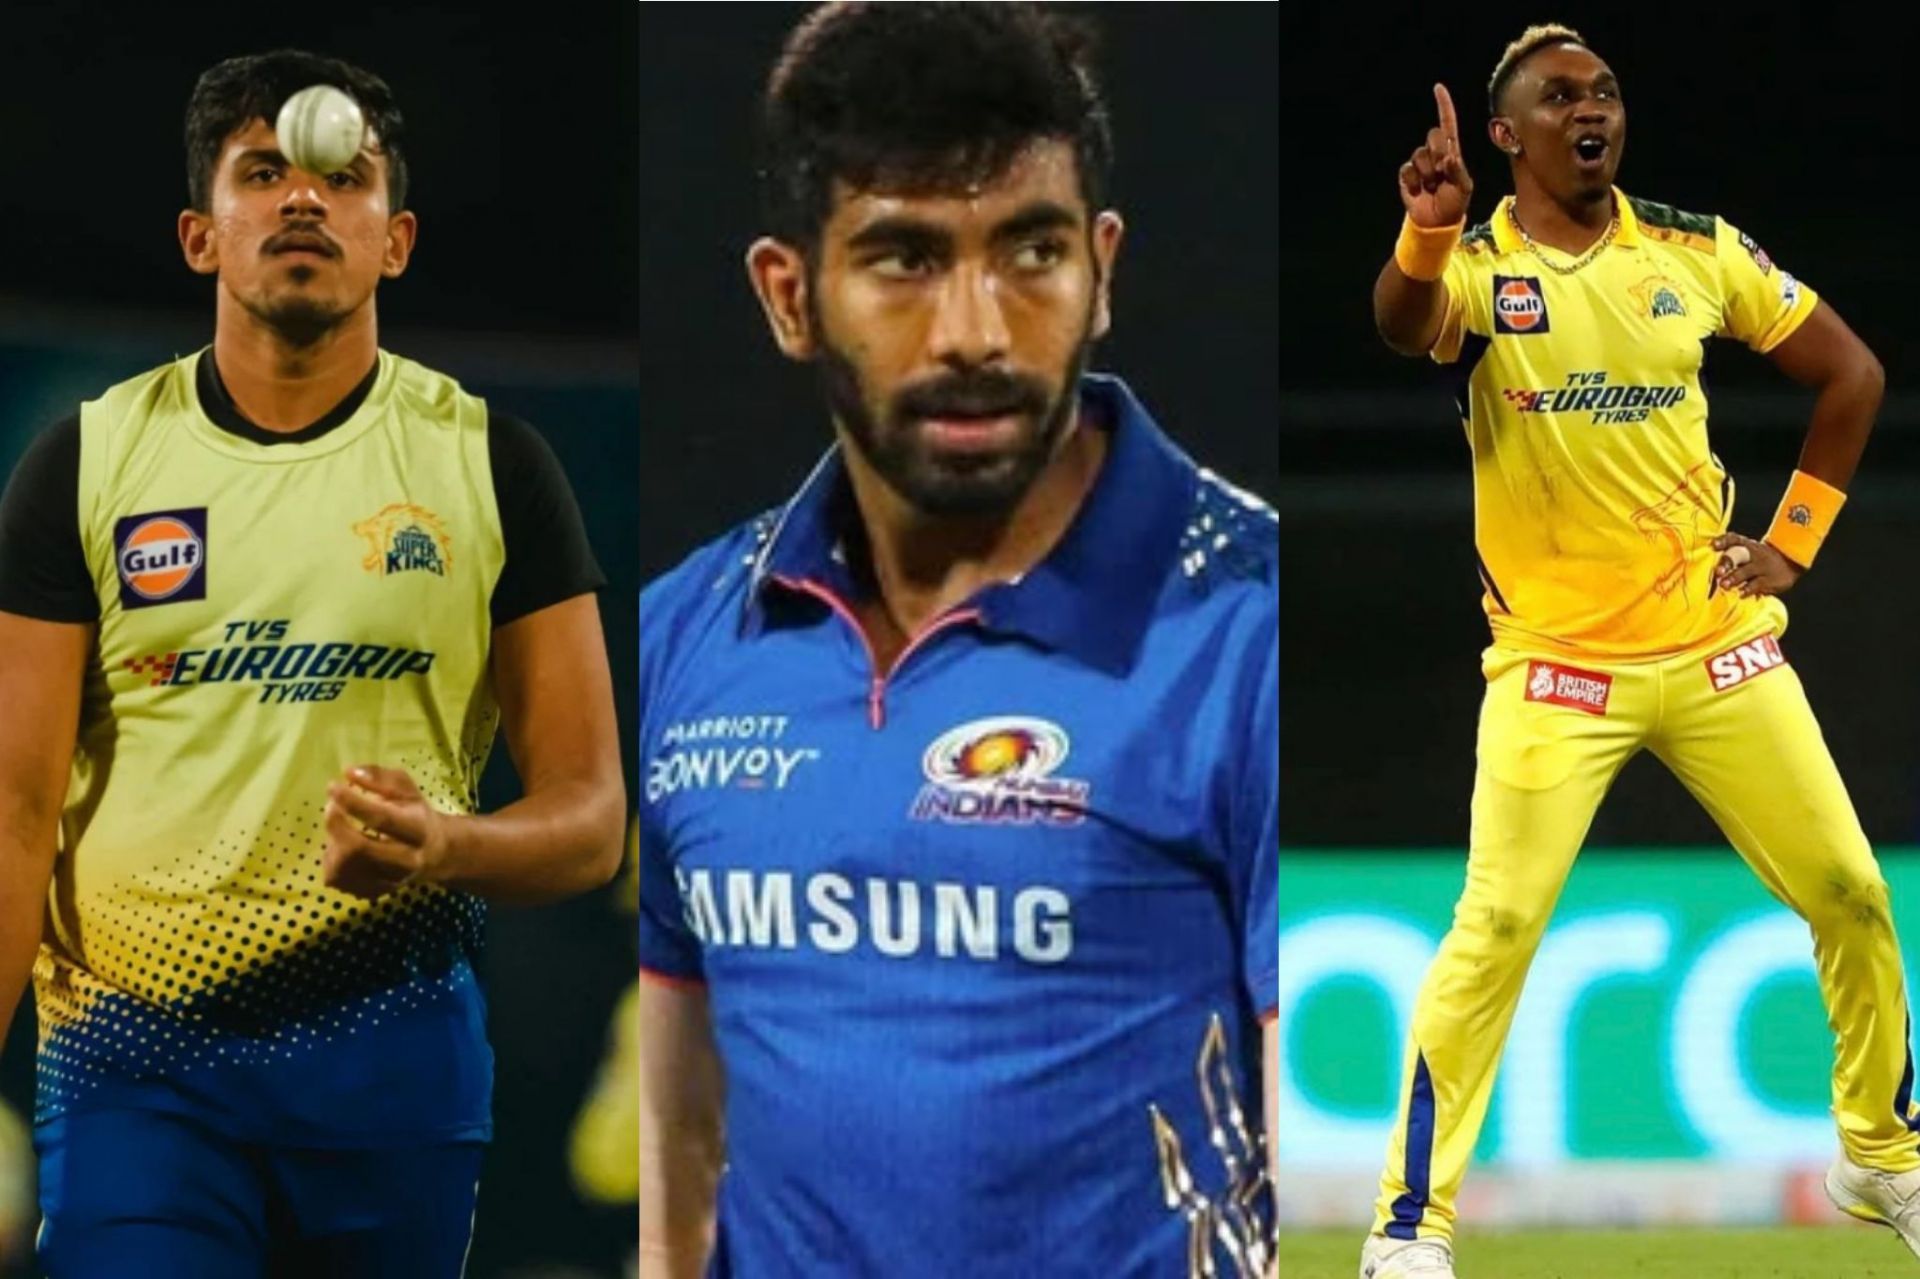 Match 33 of the IPL 2022 will be played between the Mumbai Indians and Chennai Super Kings.